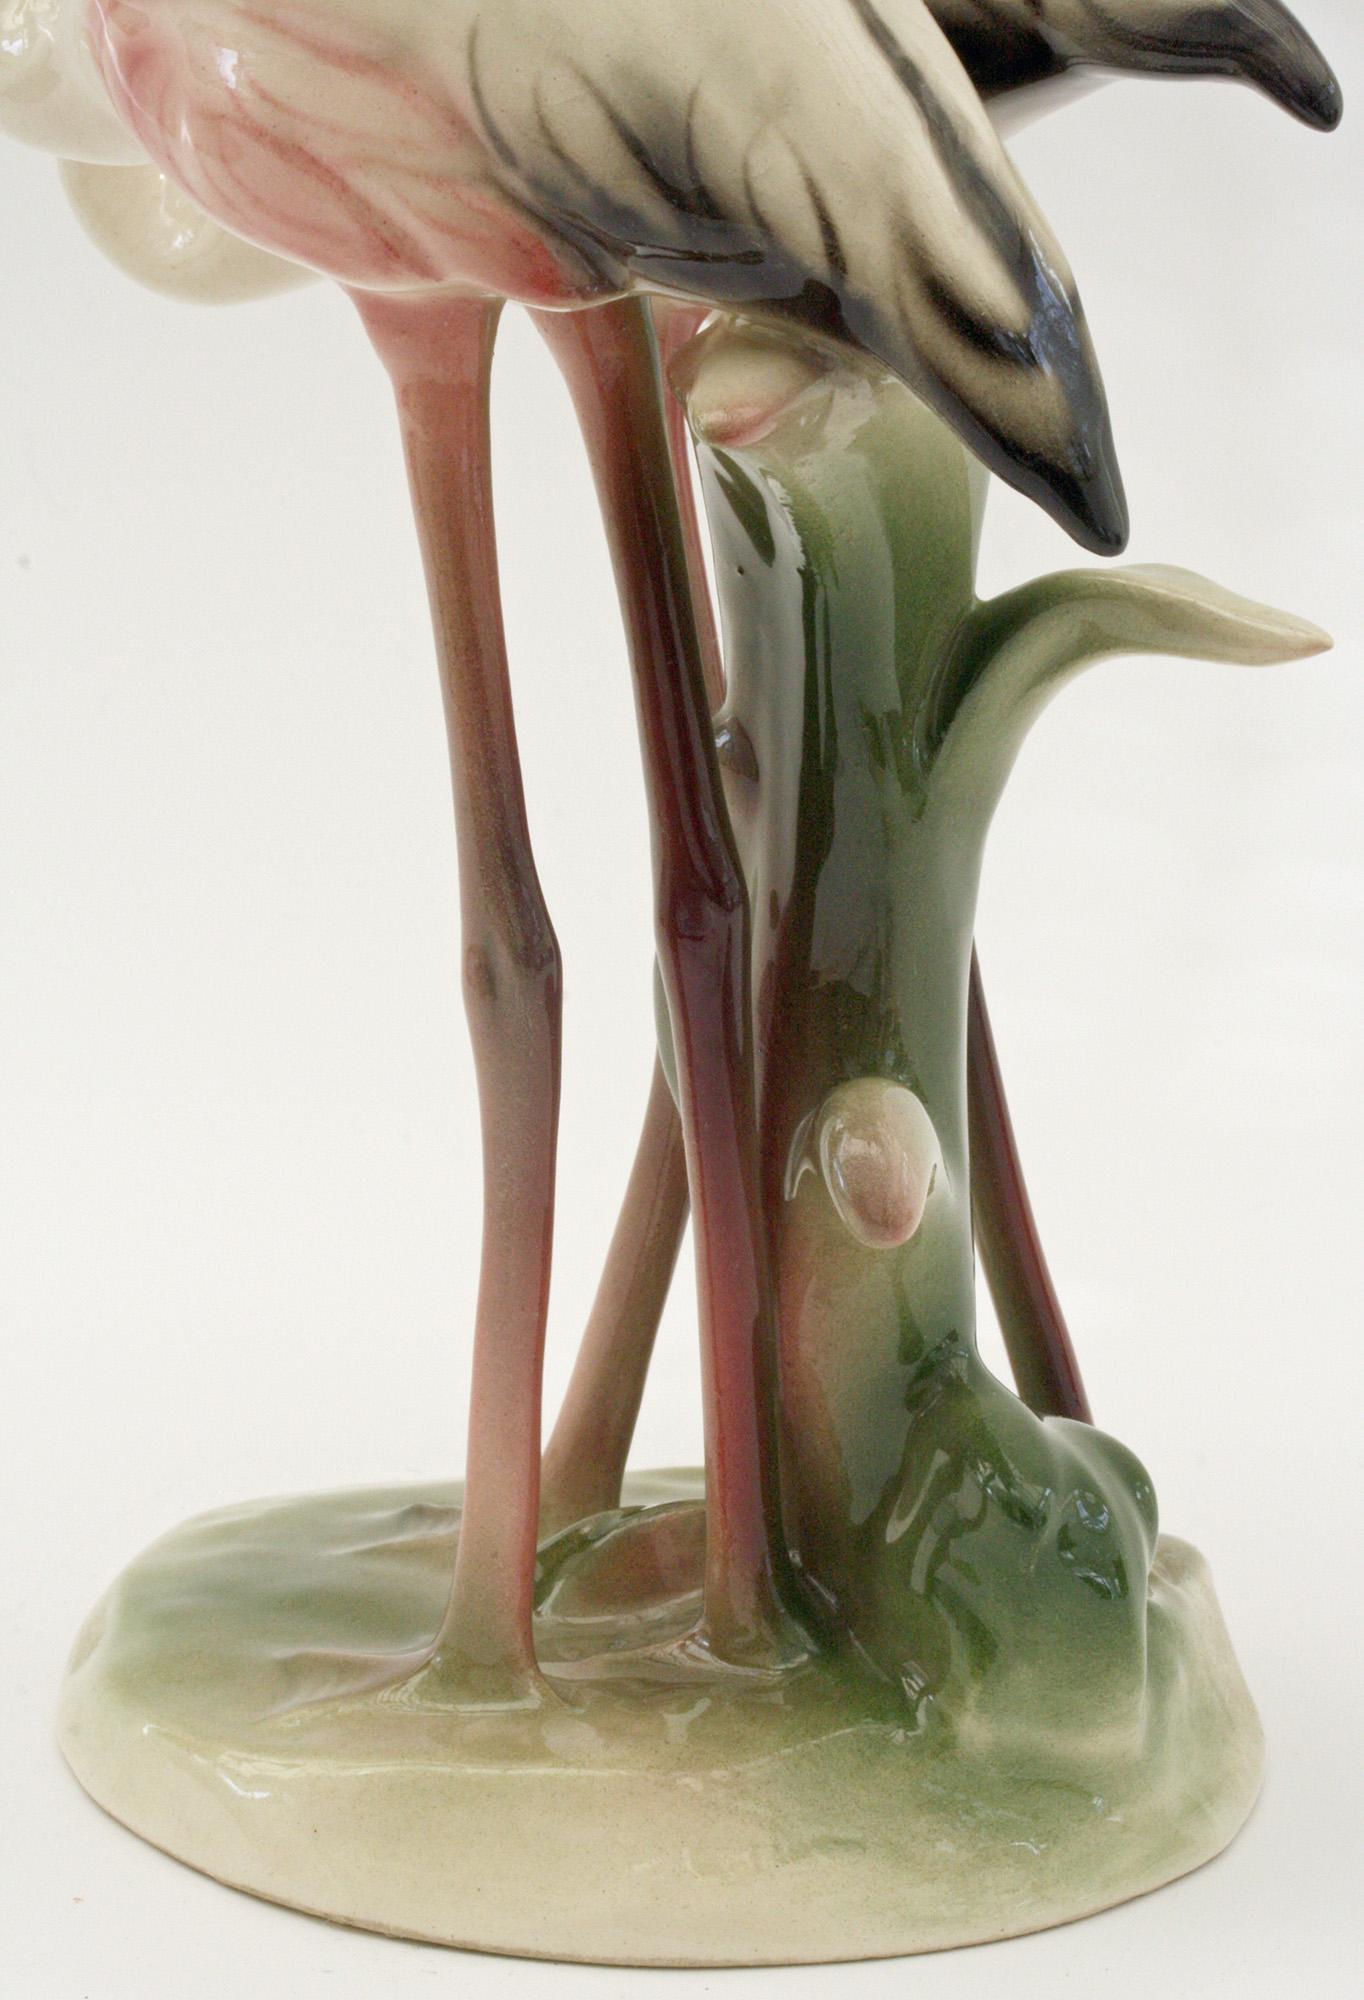 A fine pair Austrian Art Deco hand painted pottery figures of flamingos by Keramos of Wien and dating between 1920 and 1930. The figure comprises of two flamingo’s standing side by side on a rounded moulded base with a tall shrub growing to one